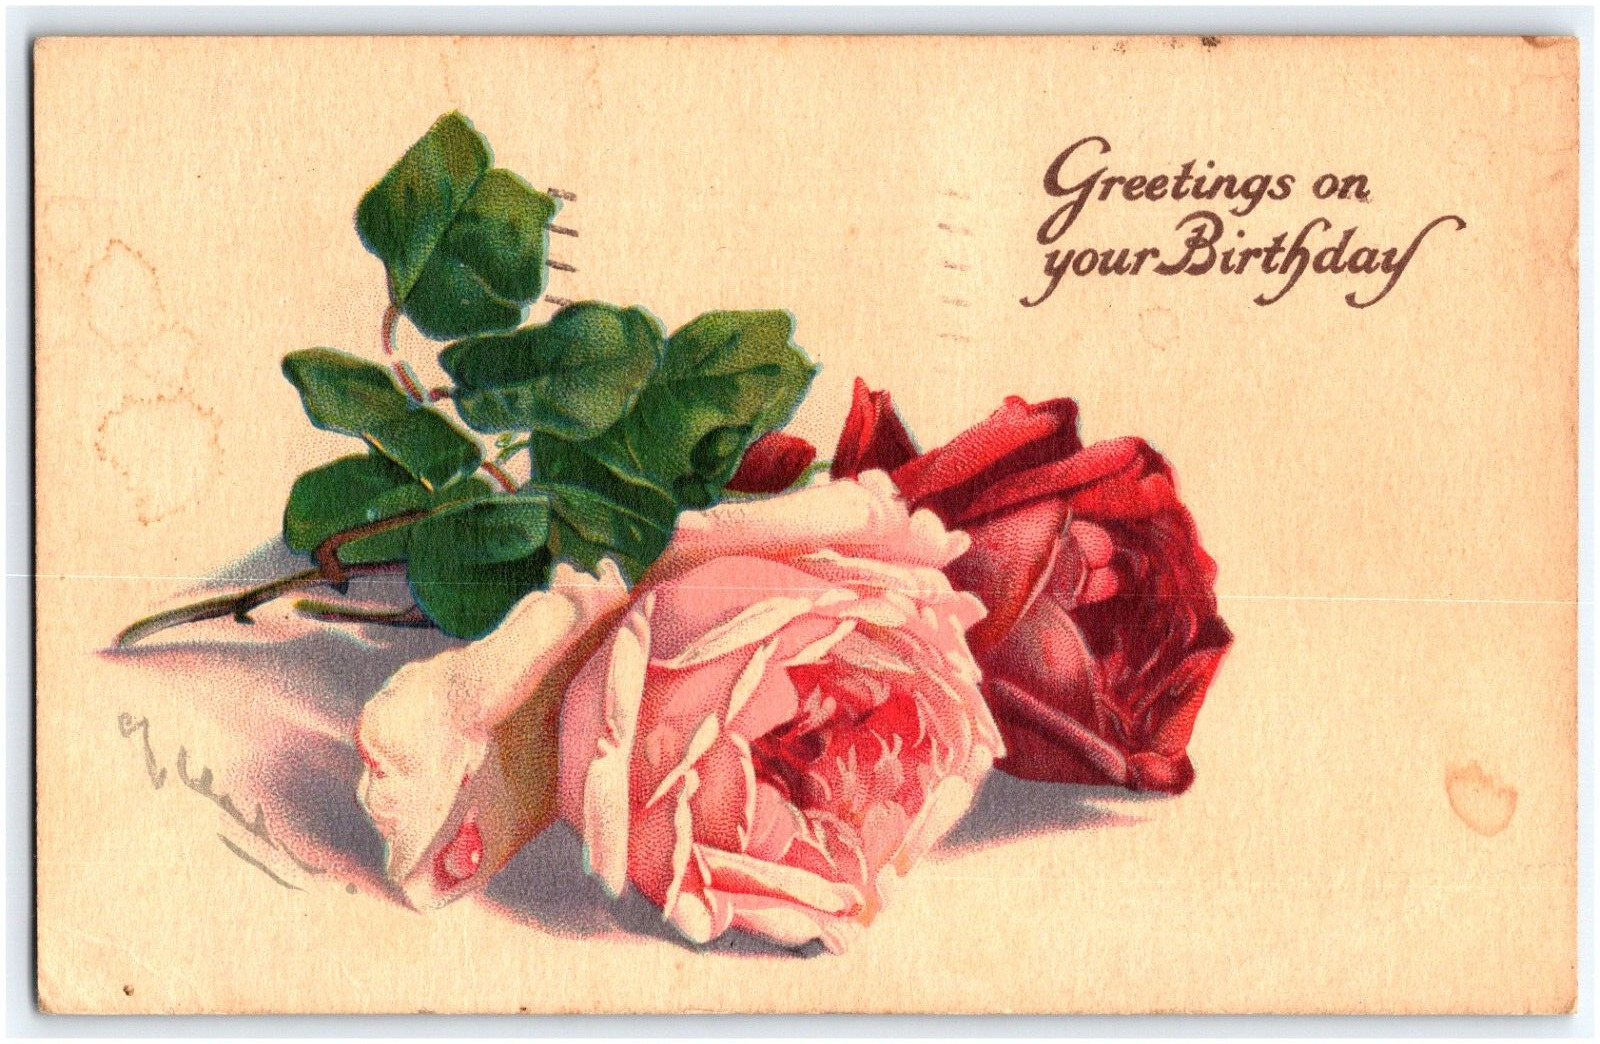 BEAUTIFUL ROSES BIRTHDAY GREETINGS ARTIST SIGNED UNKNOWN  1900s POSTCARD